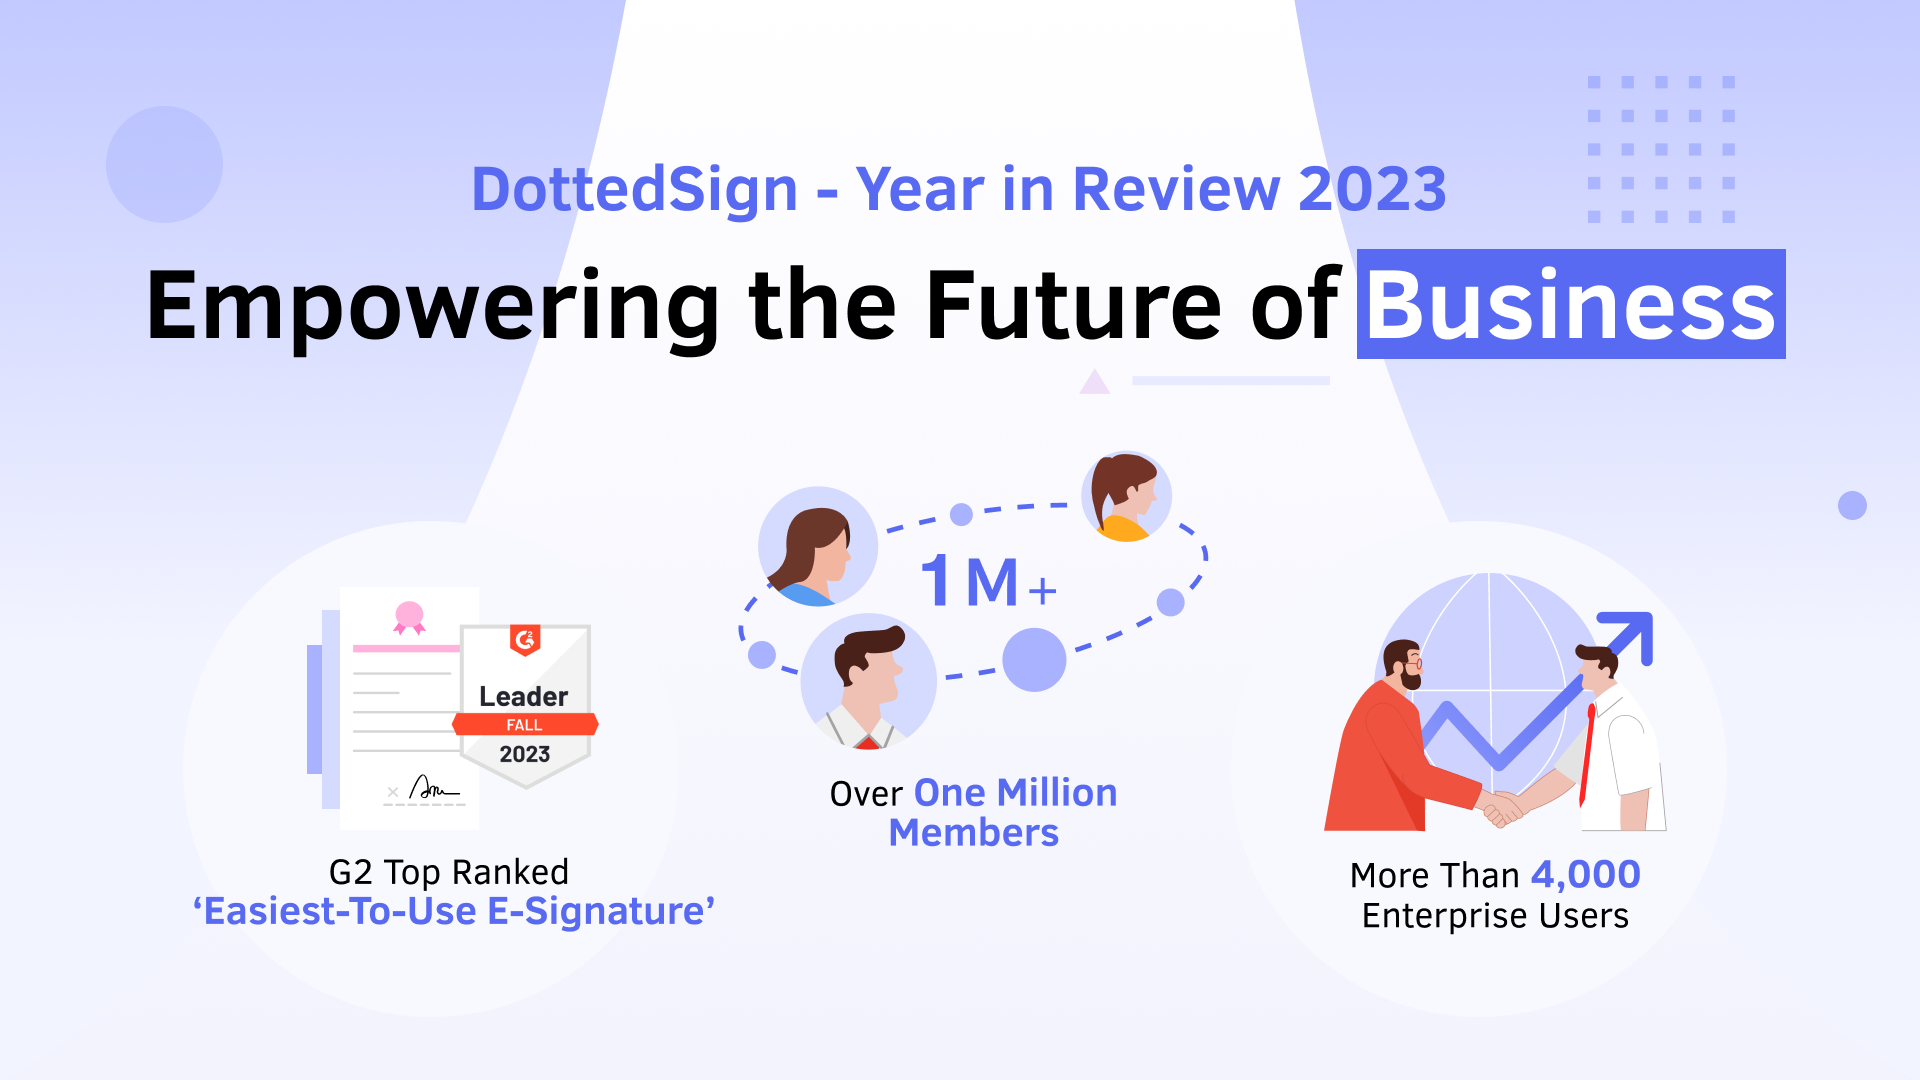 DottedSign’s Year in Review in 2023: Empowering the Future of Business